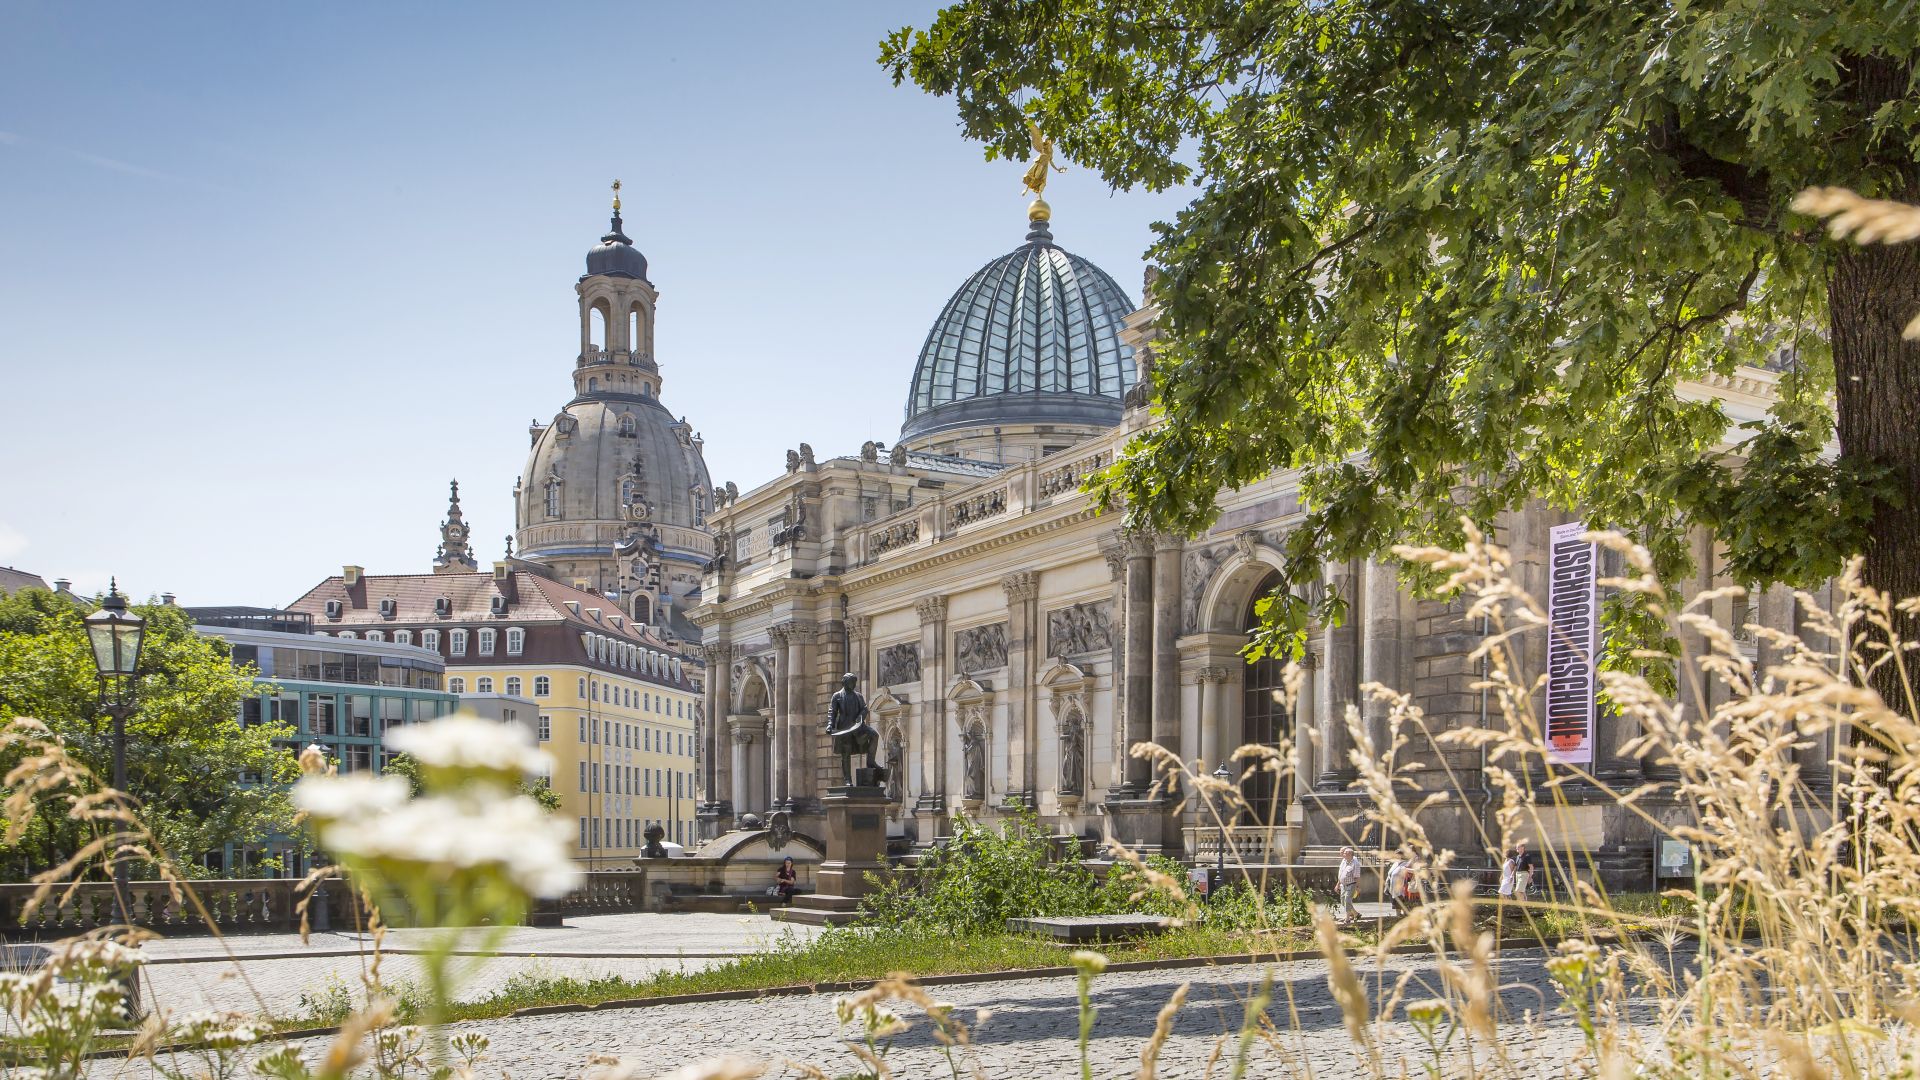 Dresden: University of the Arts, Frauenkirche in the background